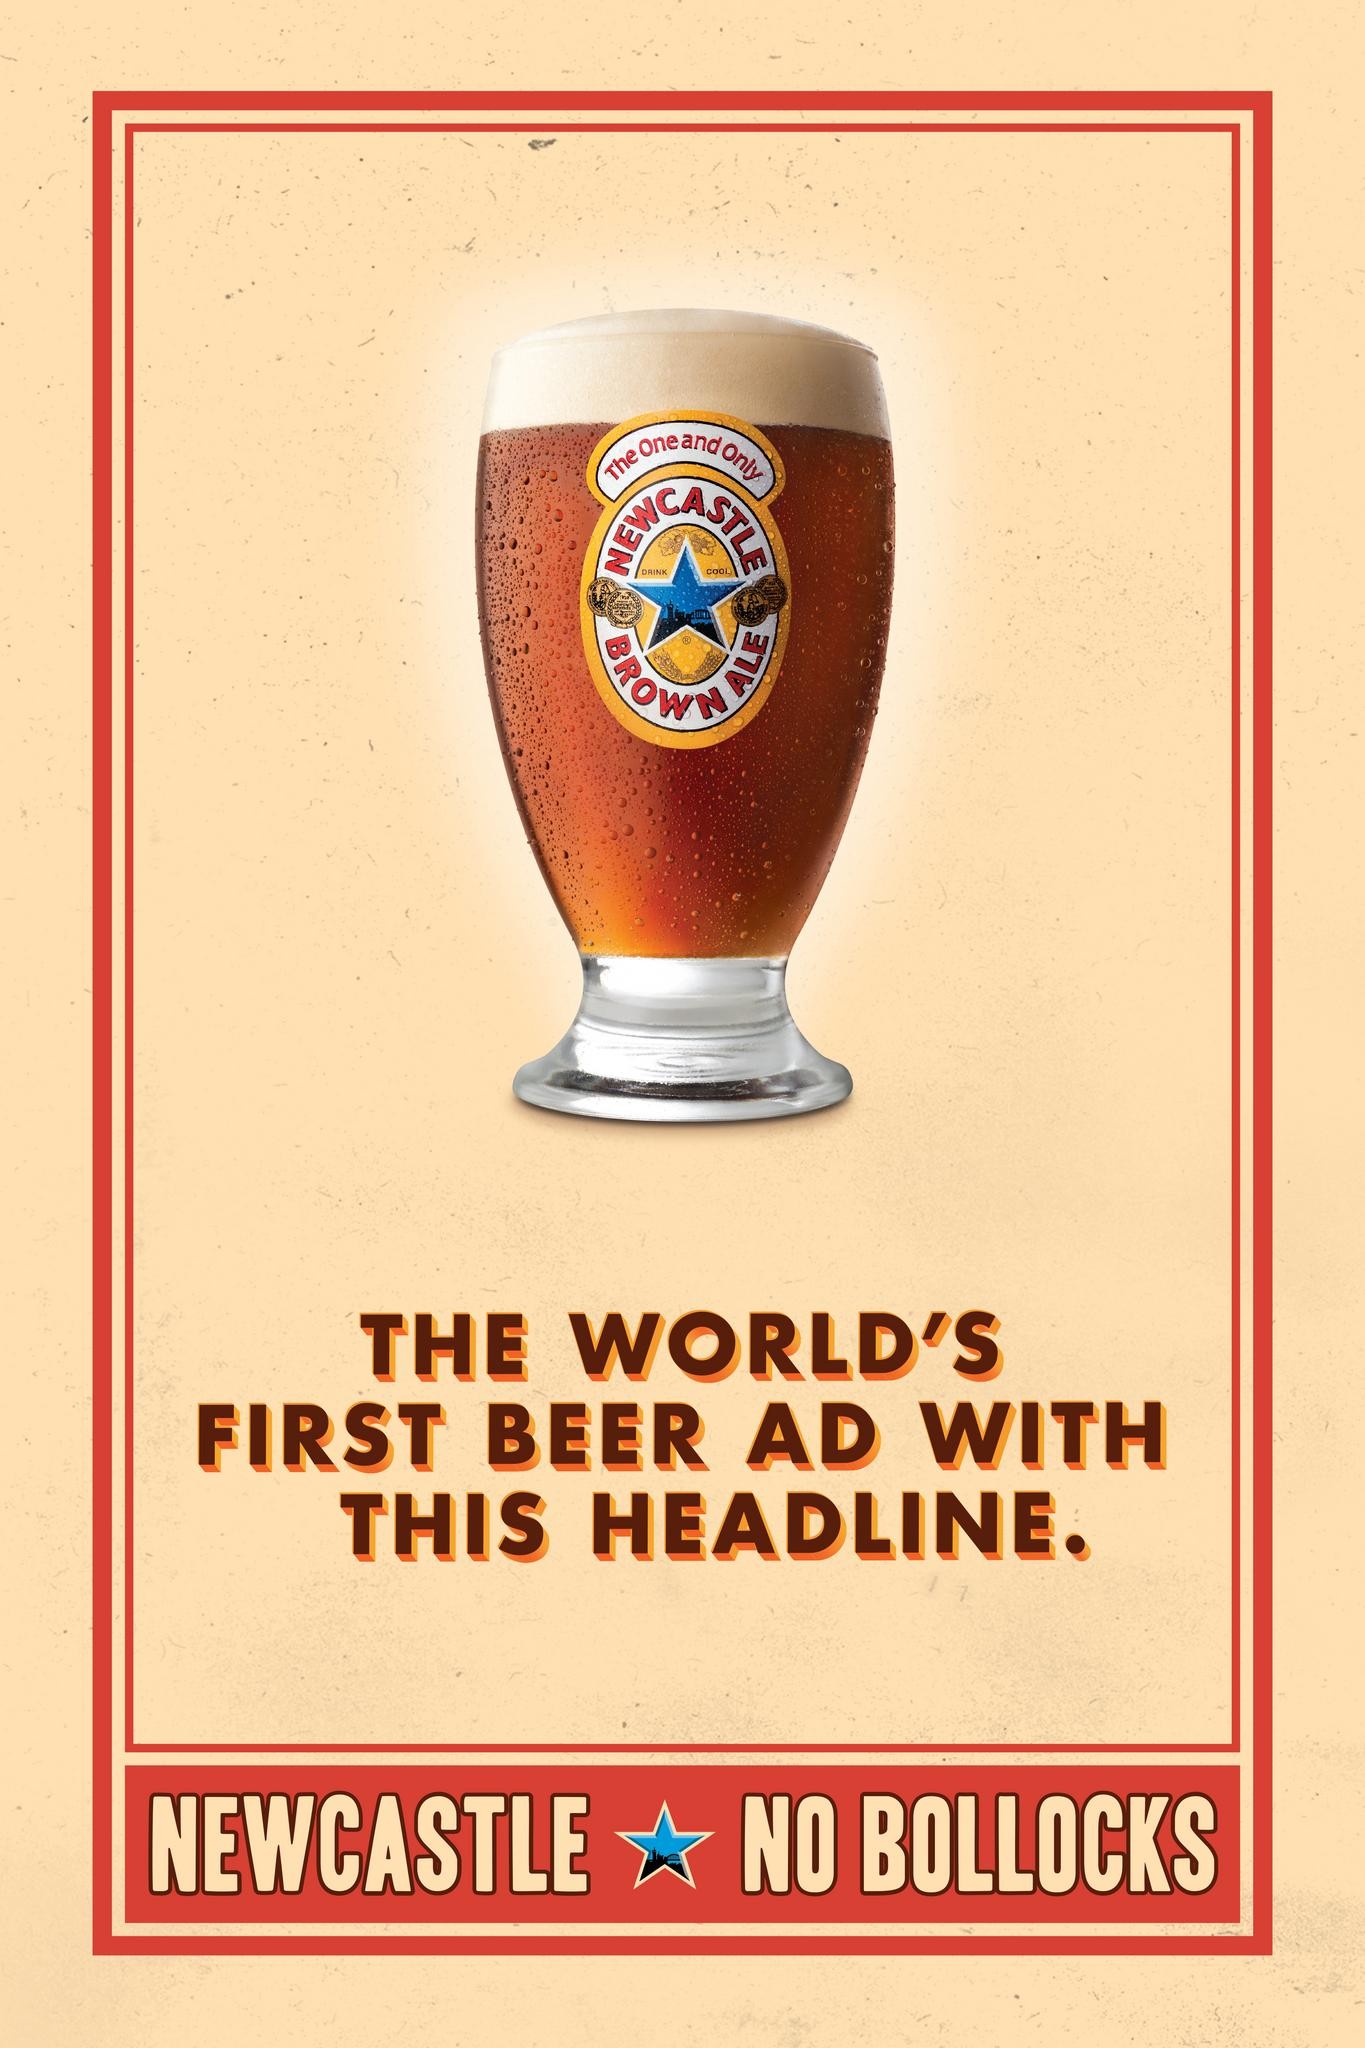 THE WORLD'S FIRST BEER AD WITH THIS HEADLINE.